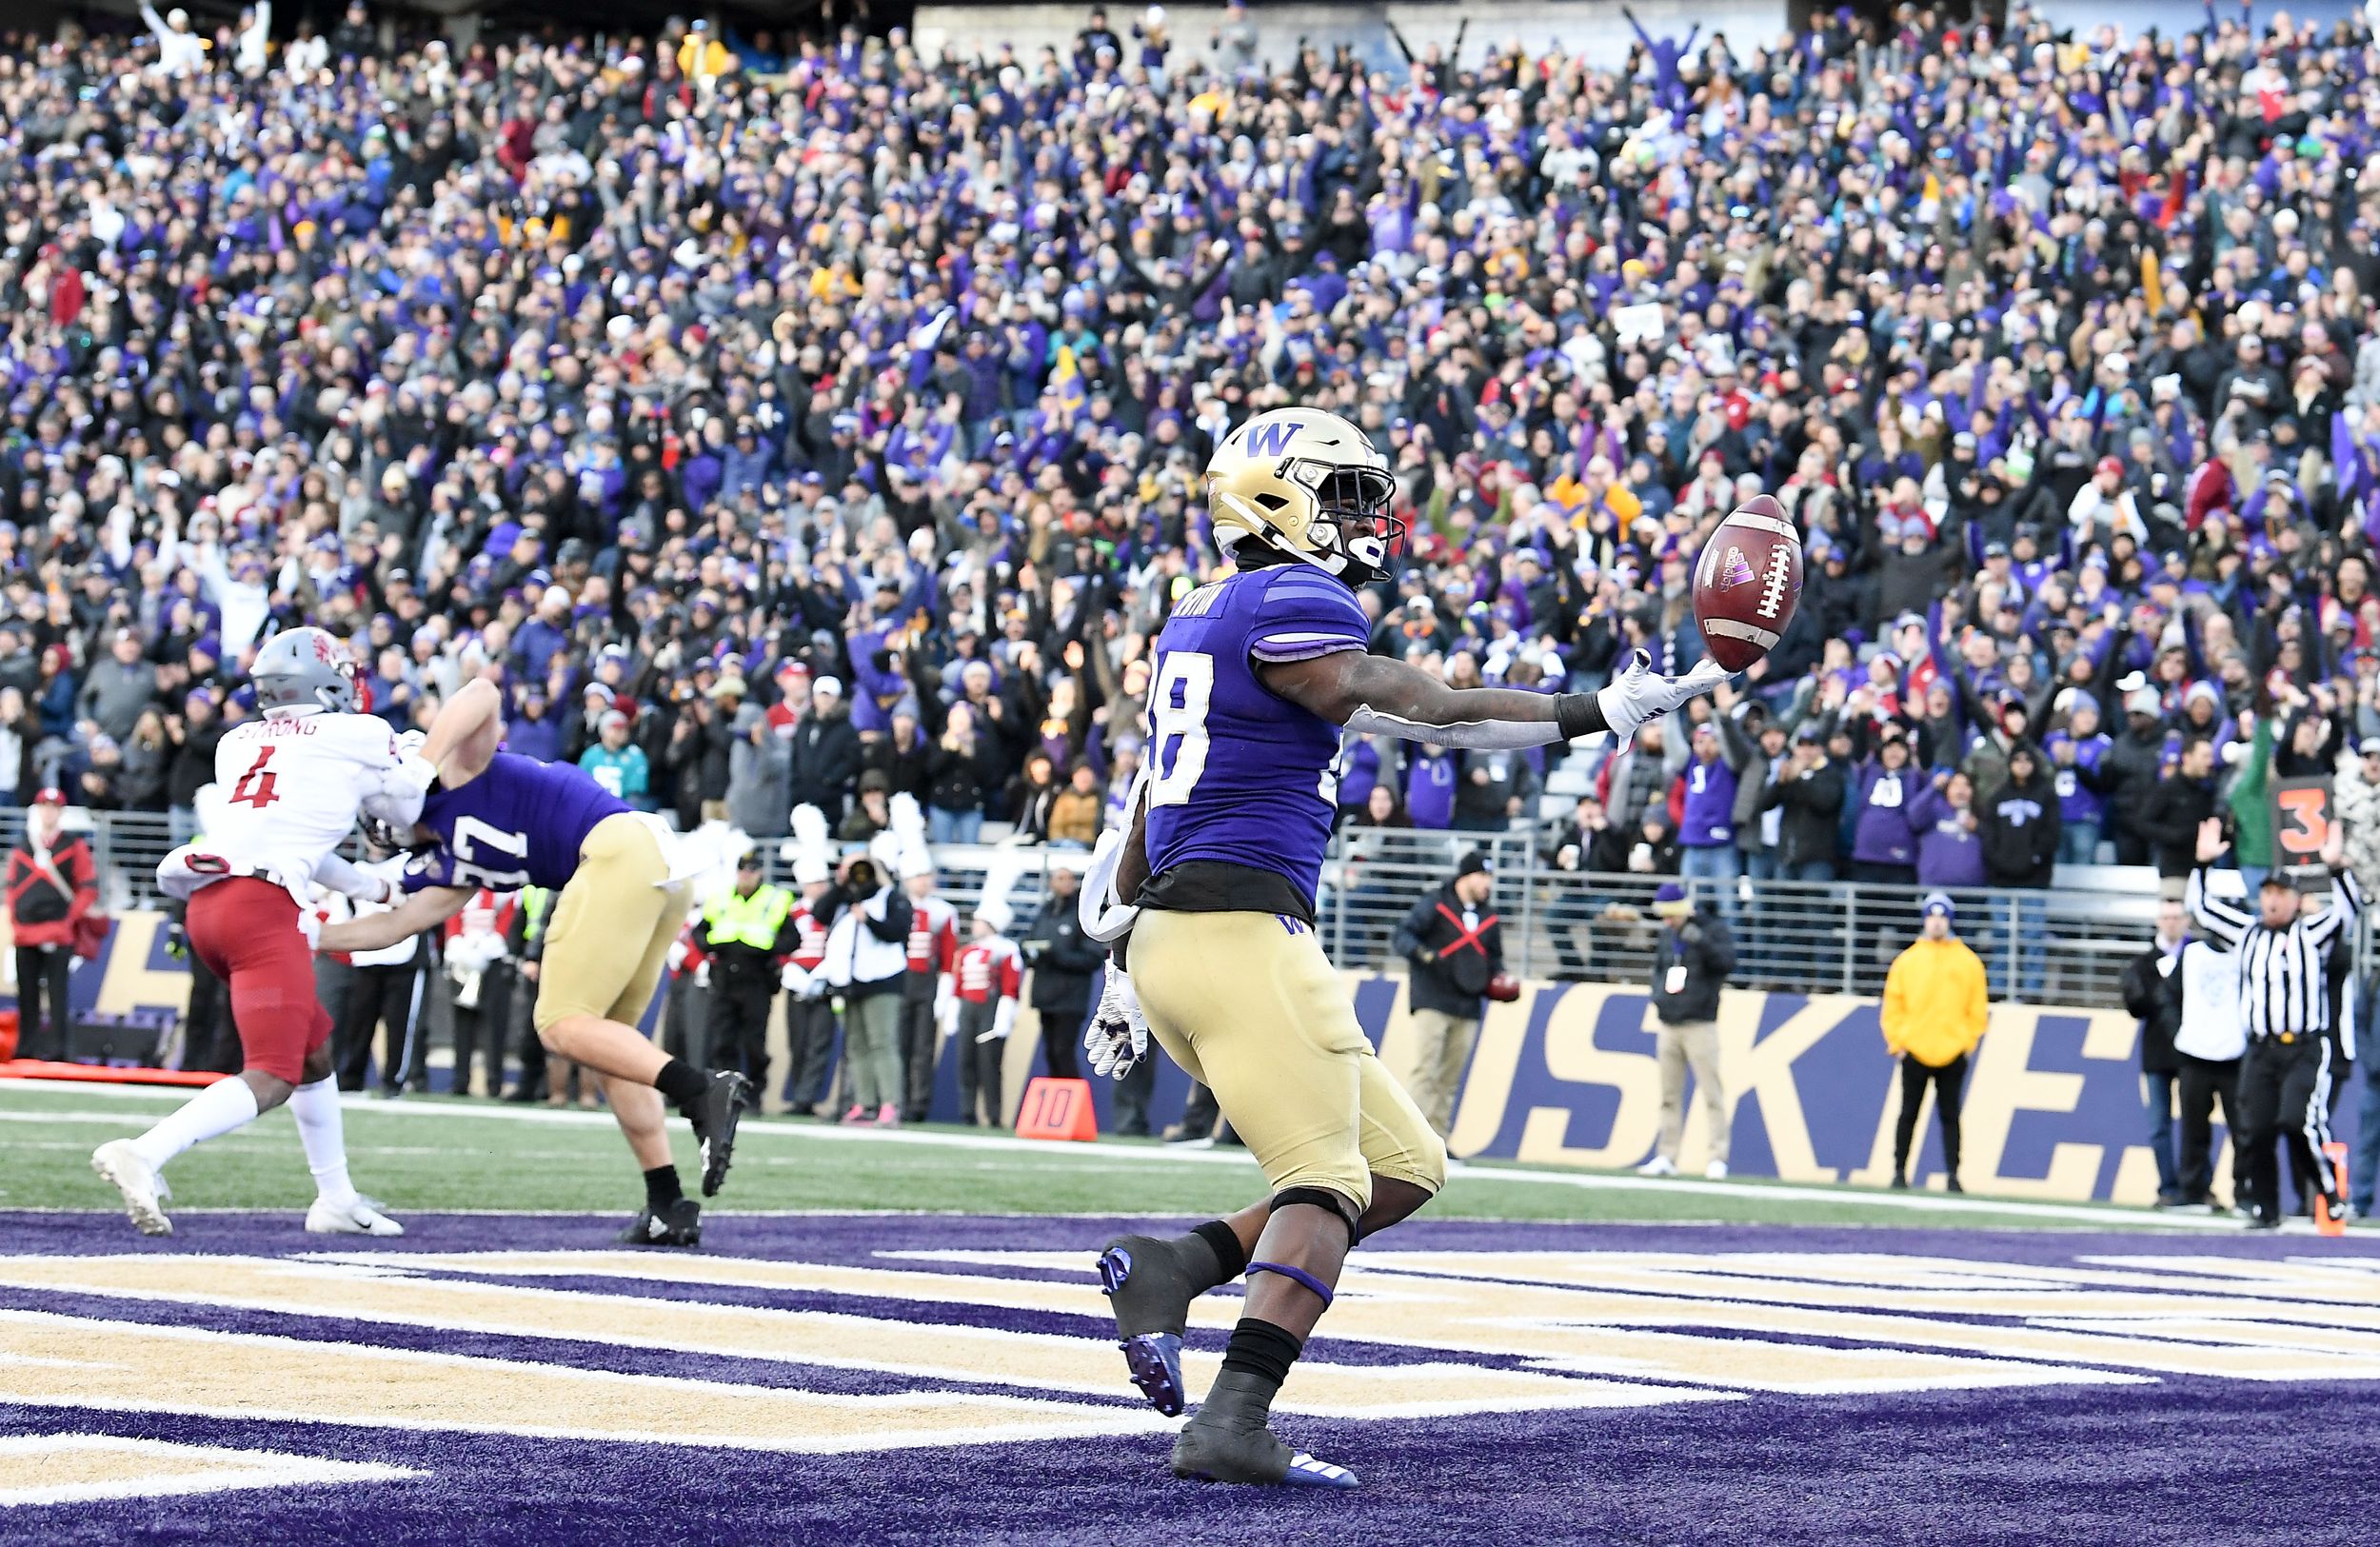 Analysis: Re-ranking the most (and least) intriguing games of the UW